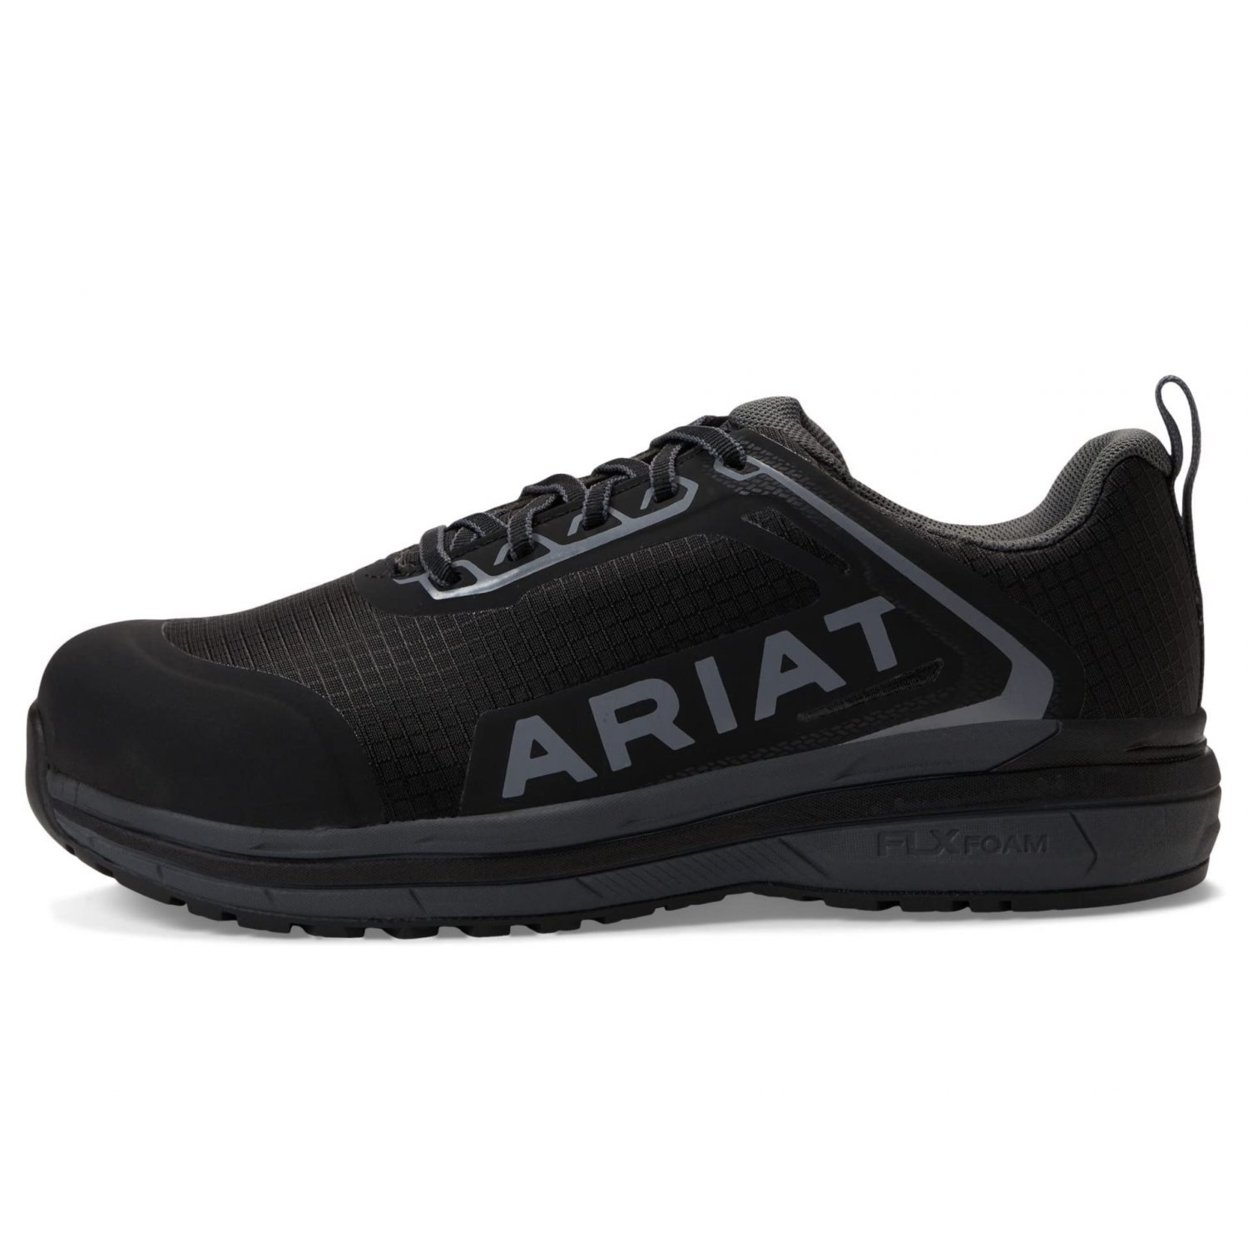 ARIAT Women's Outpace Composite Toe Safety Shoe Fire ONE SIZE BLACK - BLACK, 8 Wide